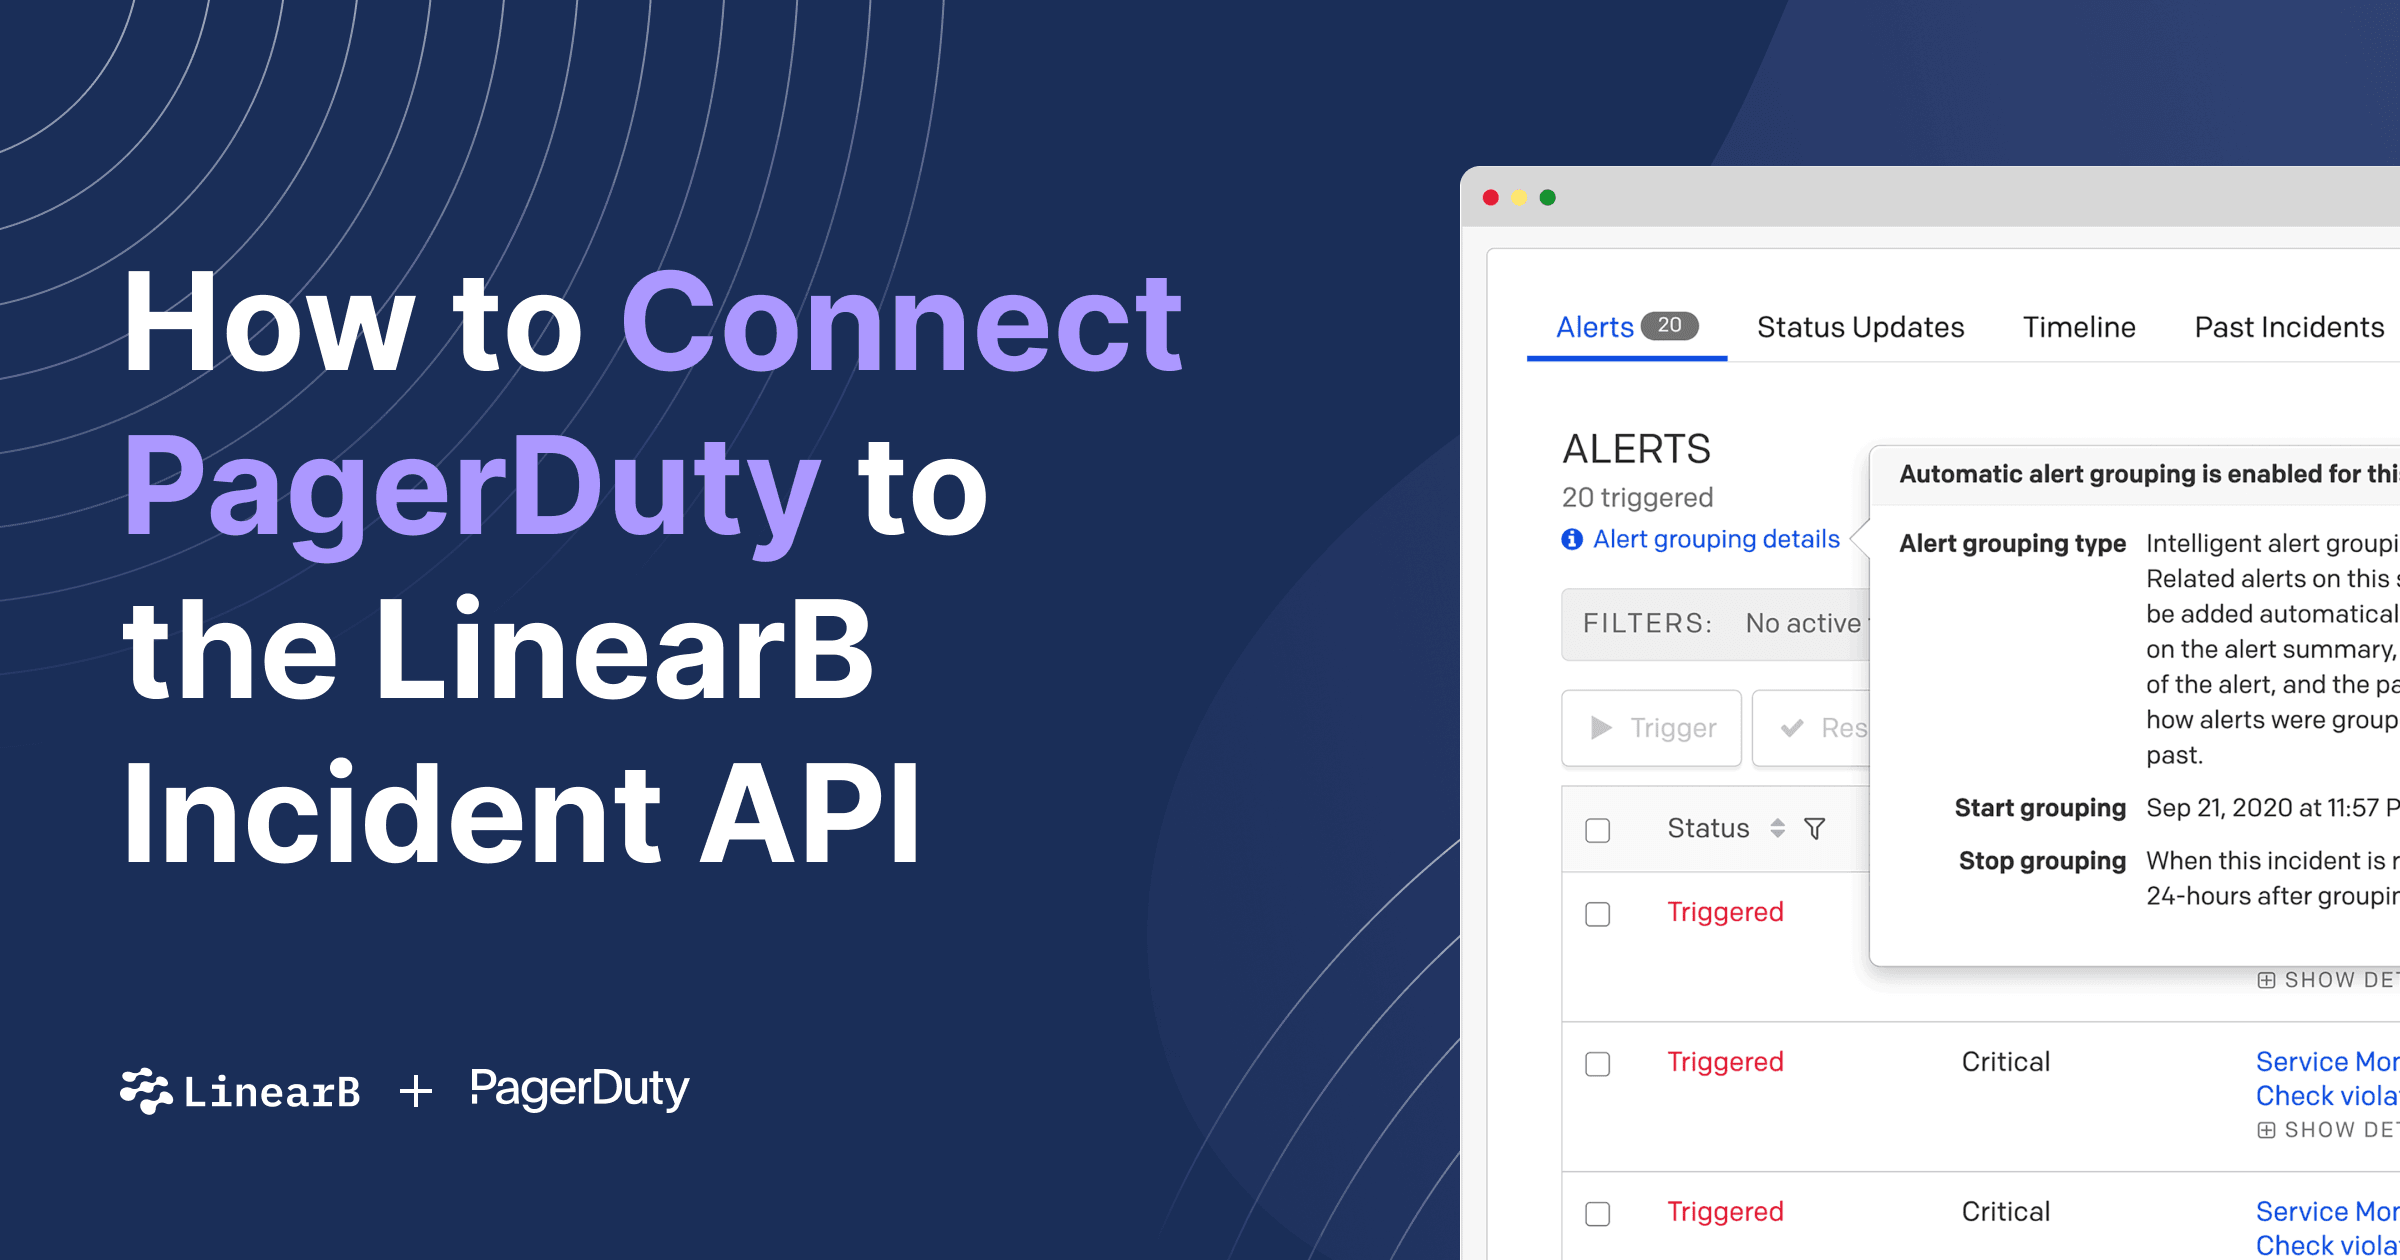 How to Use the LinearB Incident API with PagerDuty